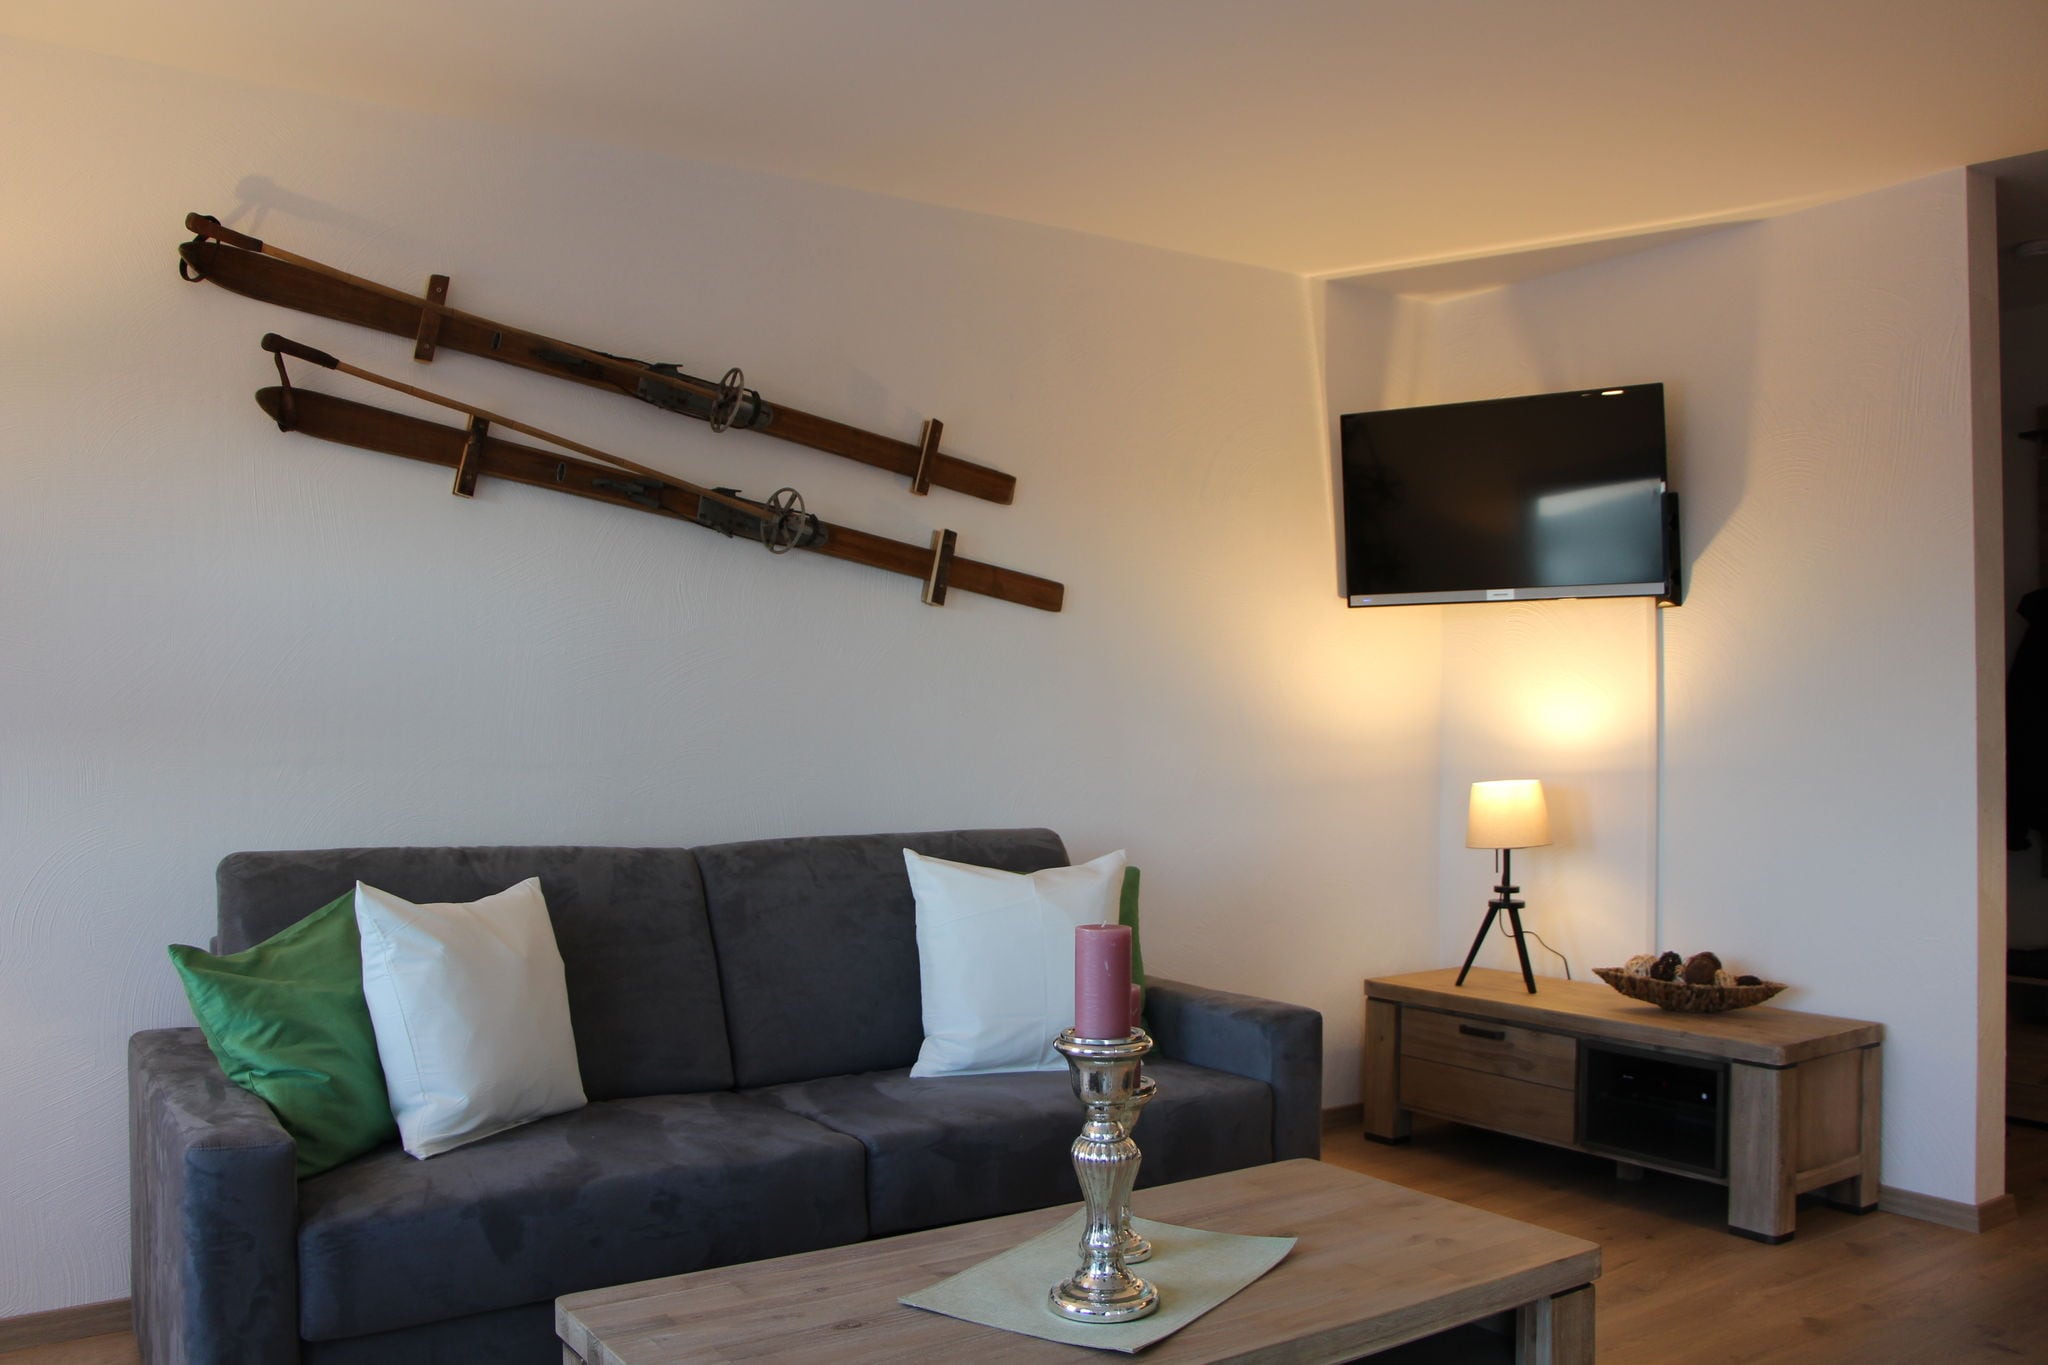 Apartment with terrace and carport in Winterberg near the ski lifts